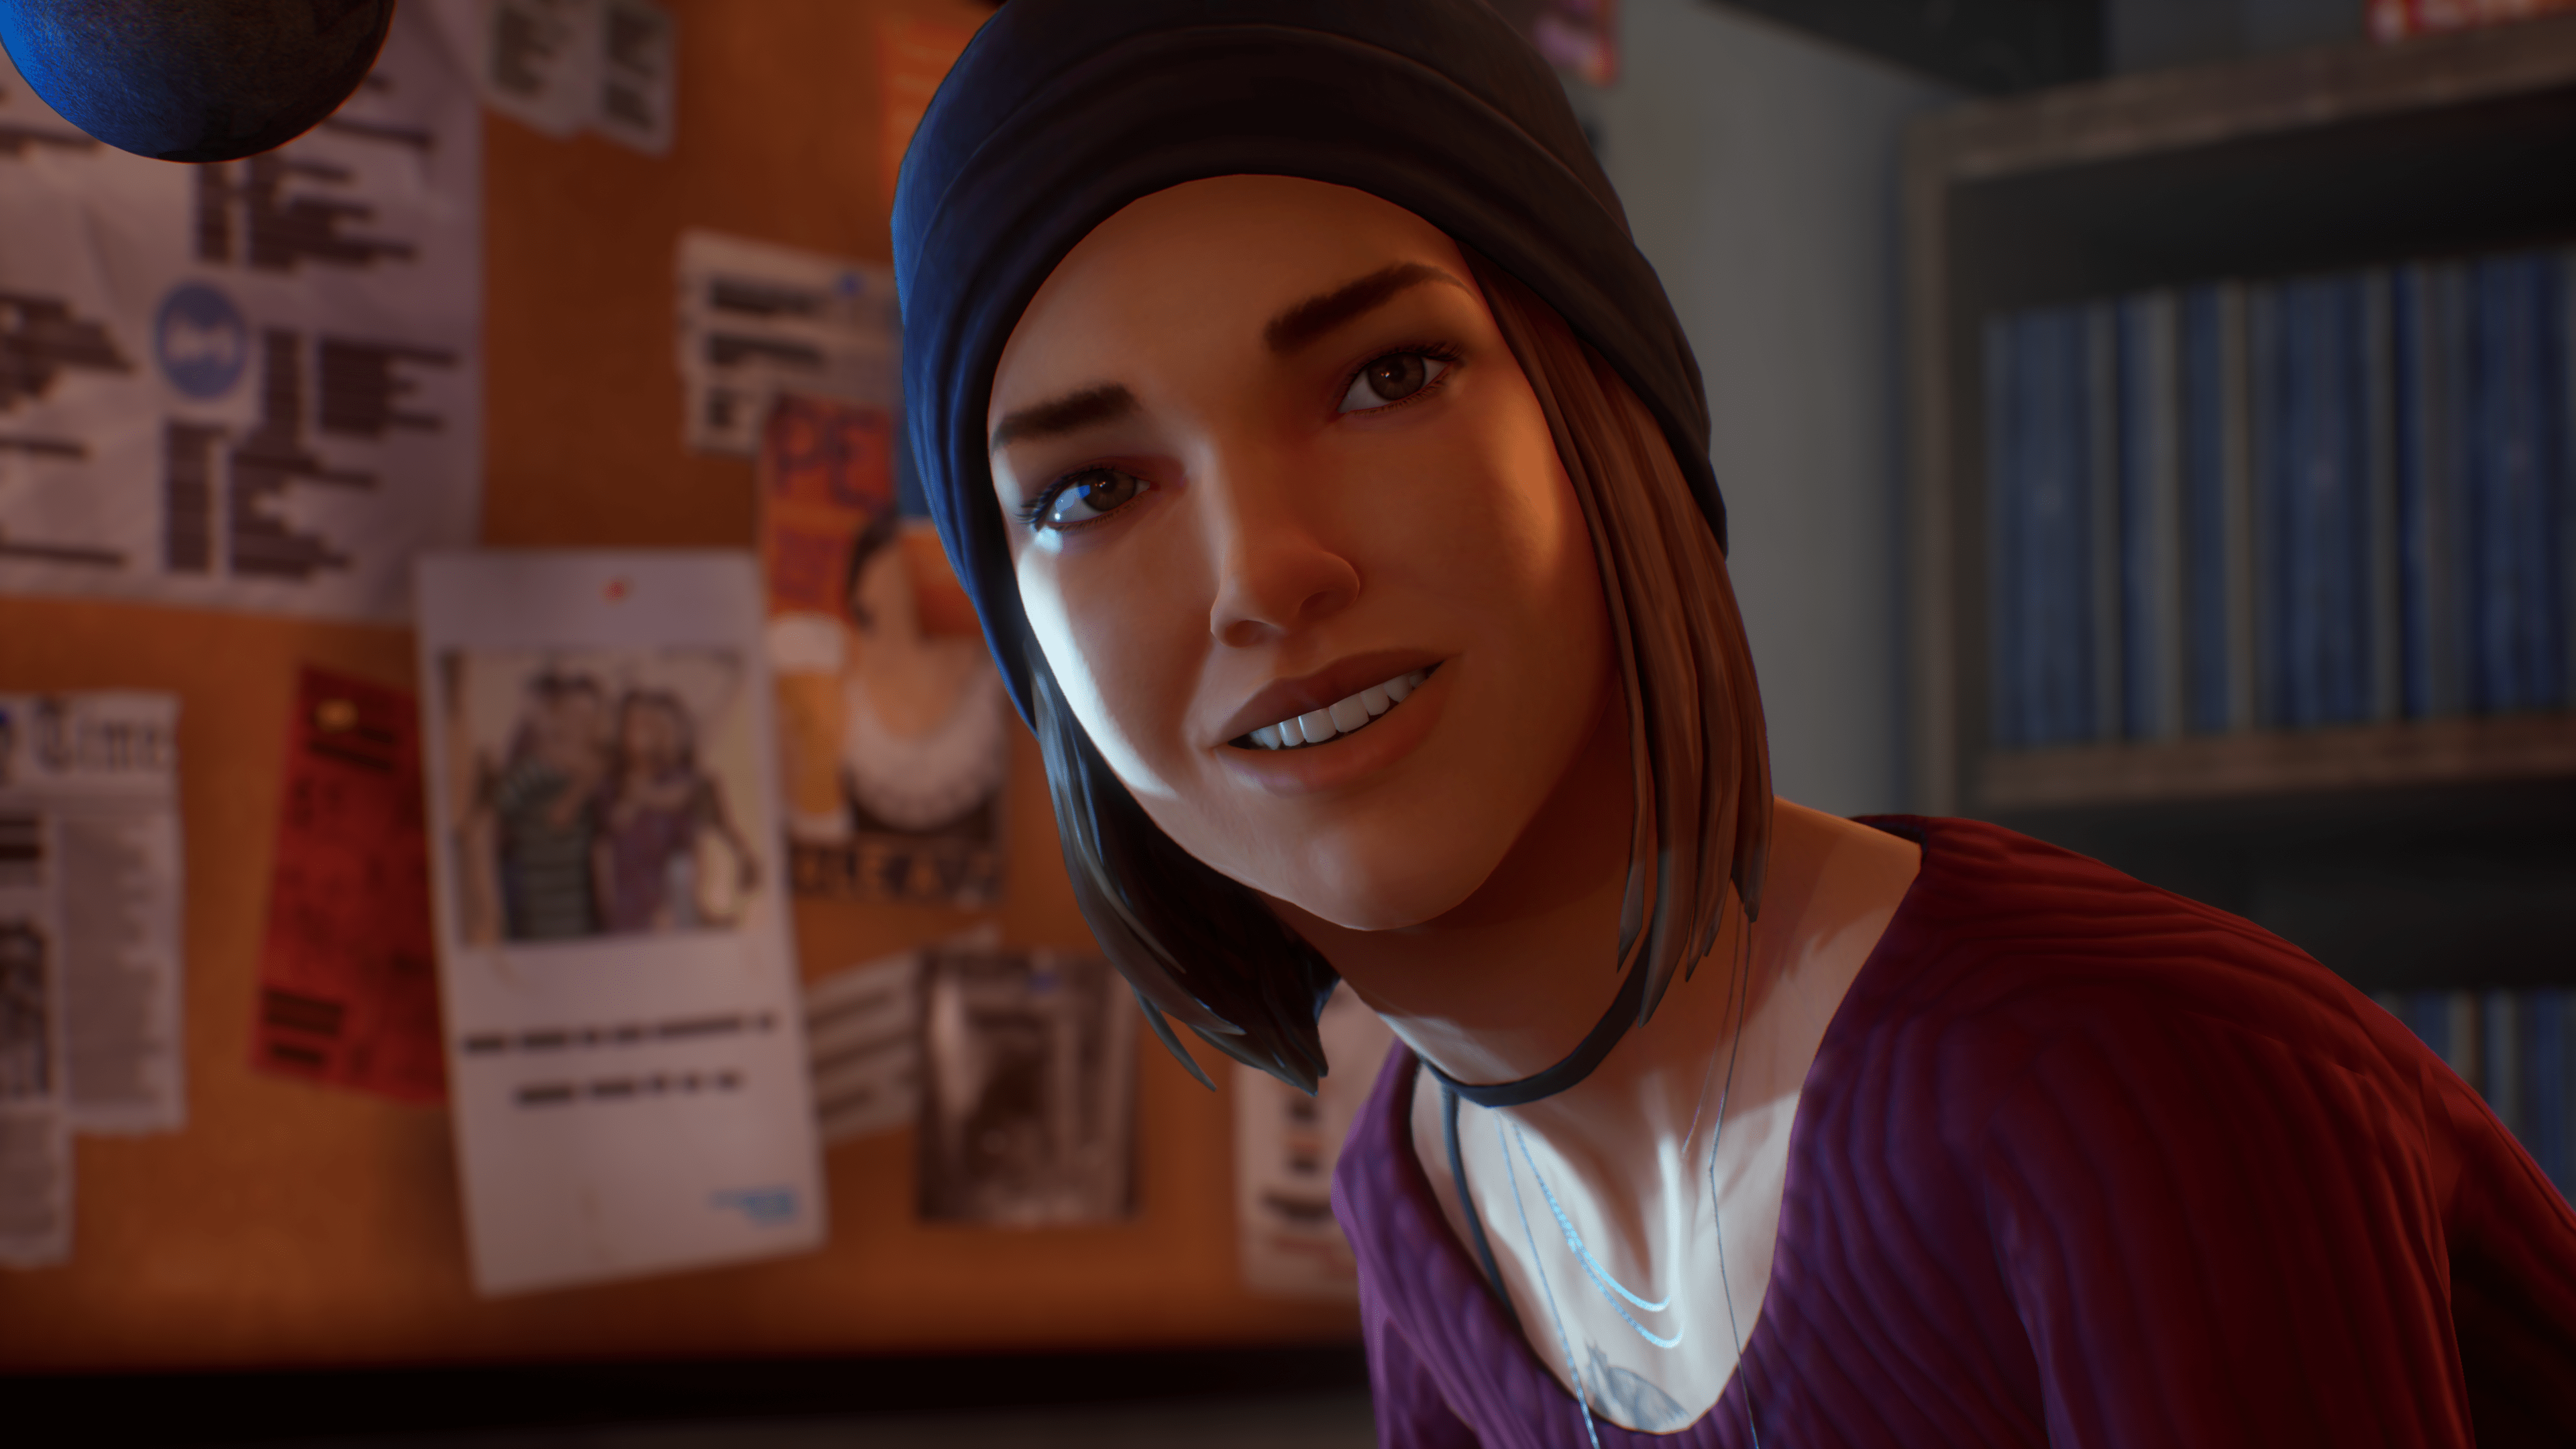 Life is Strange: True Colors: How to Romance Steph